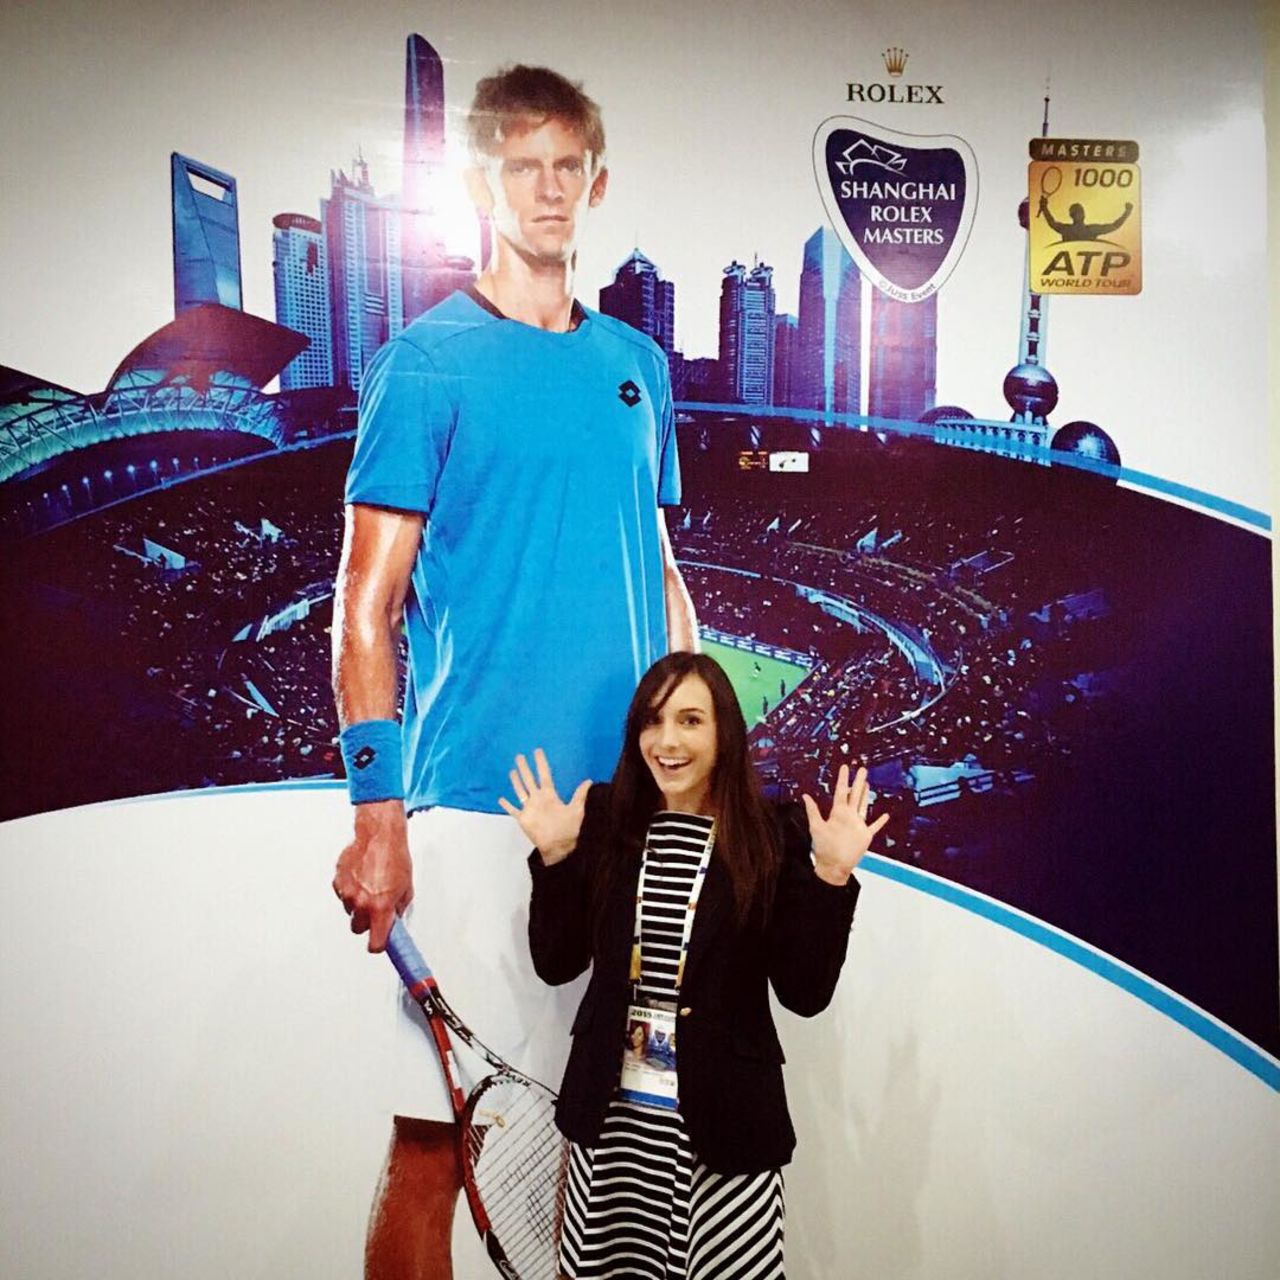 The 29-year-old stands before a giant billboard of her husband -- who in real-life is a towering 6 foot 8 inches tall.